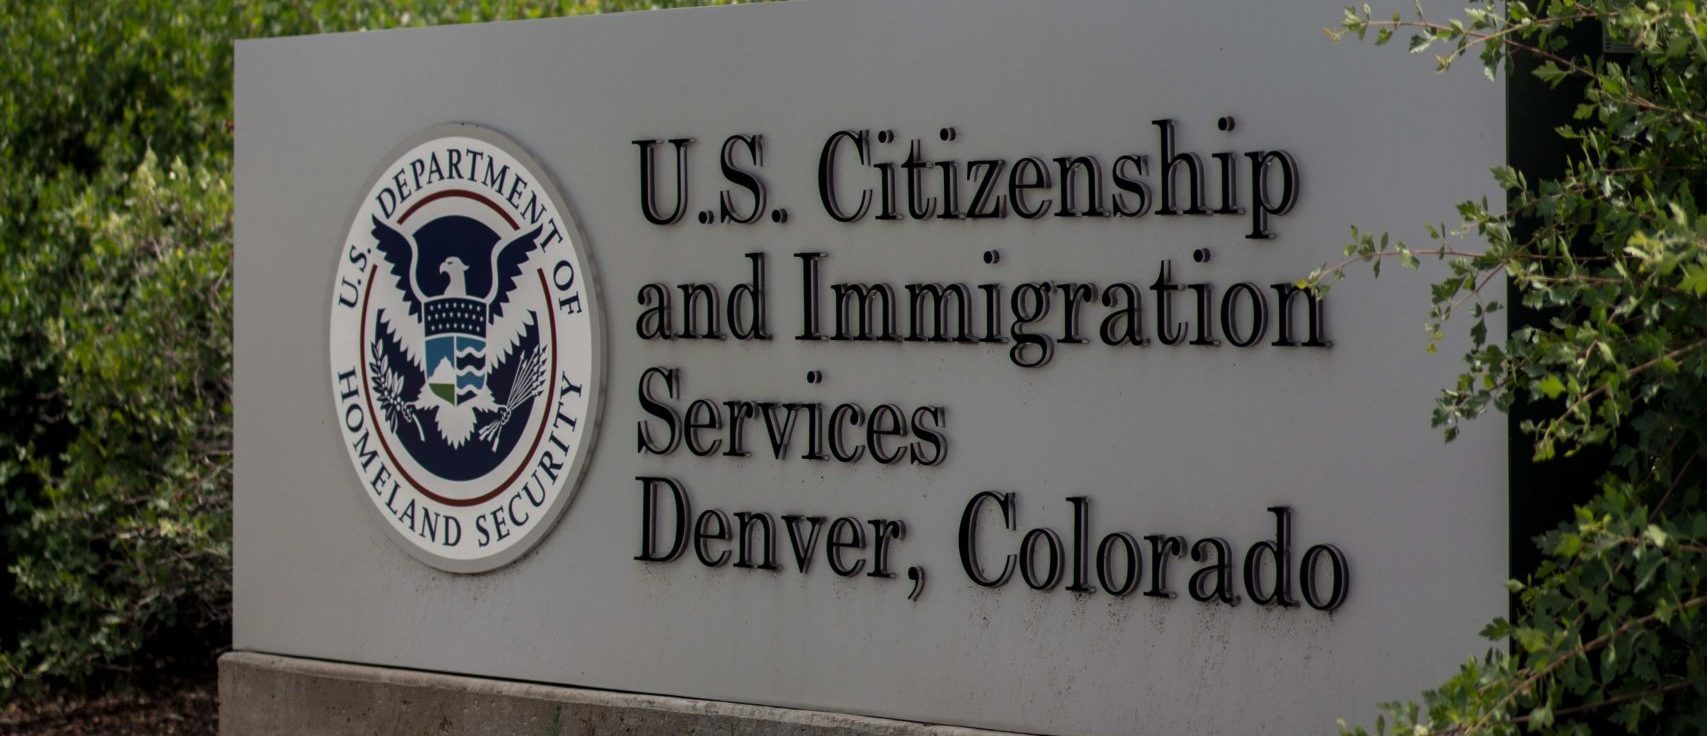 The US Citizenship and Immigration Services building, also the location of the ICE Denver Field Office, is seen outside outside of Denver, Colorado on July 14, 2019. [CHET STRANGE/AFP via Getty Images]